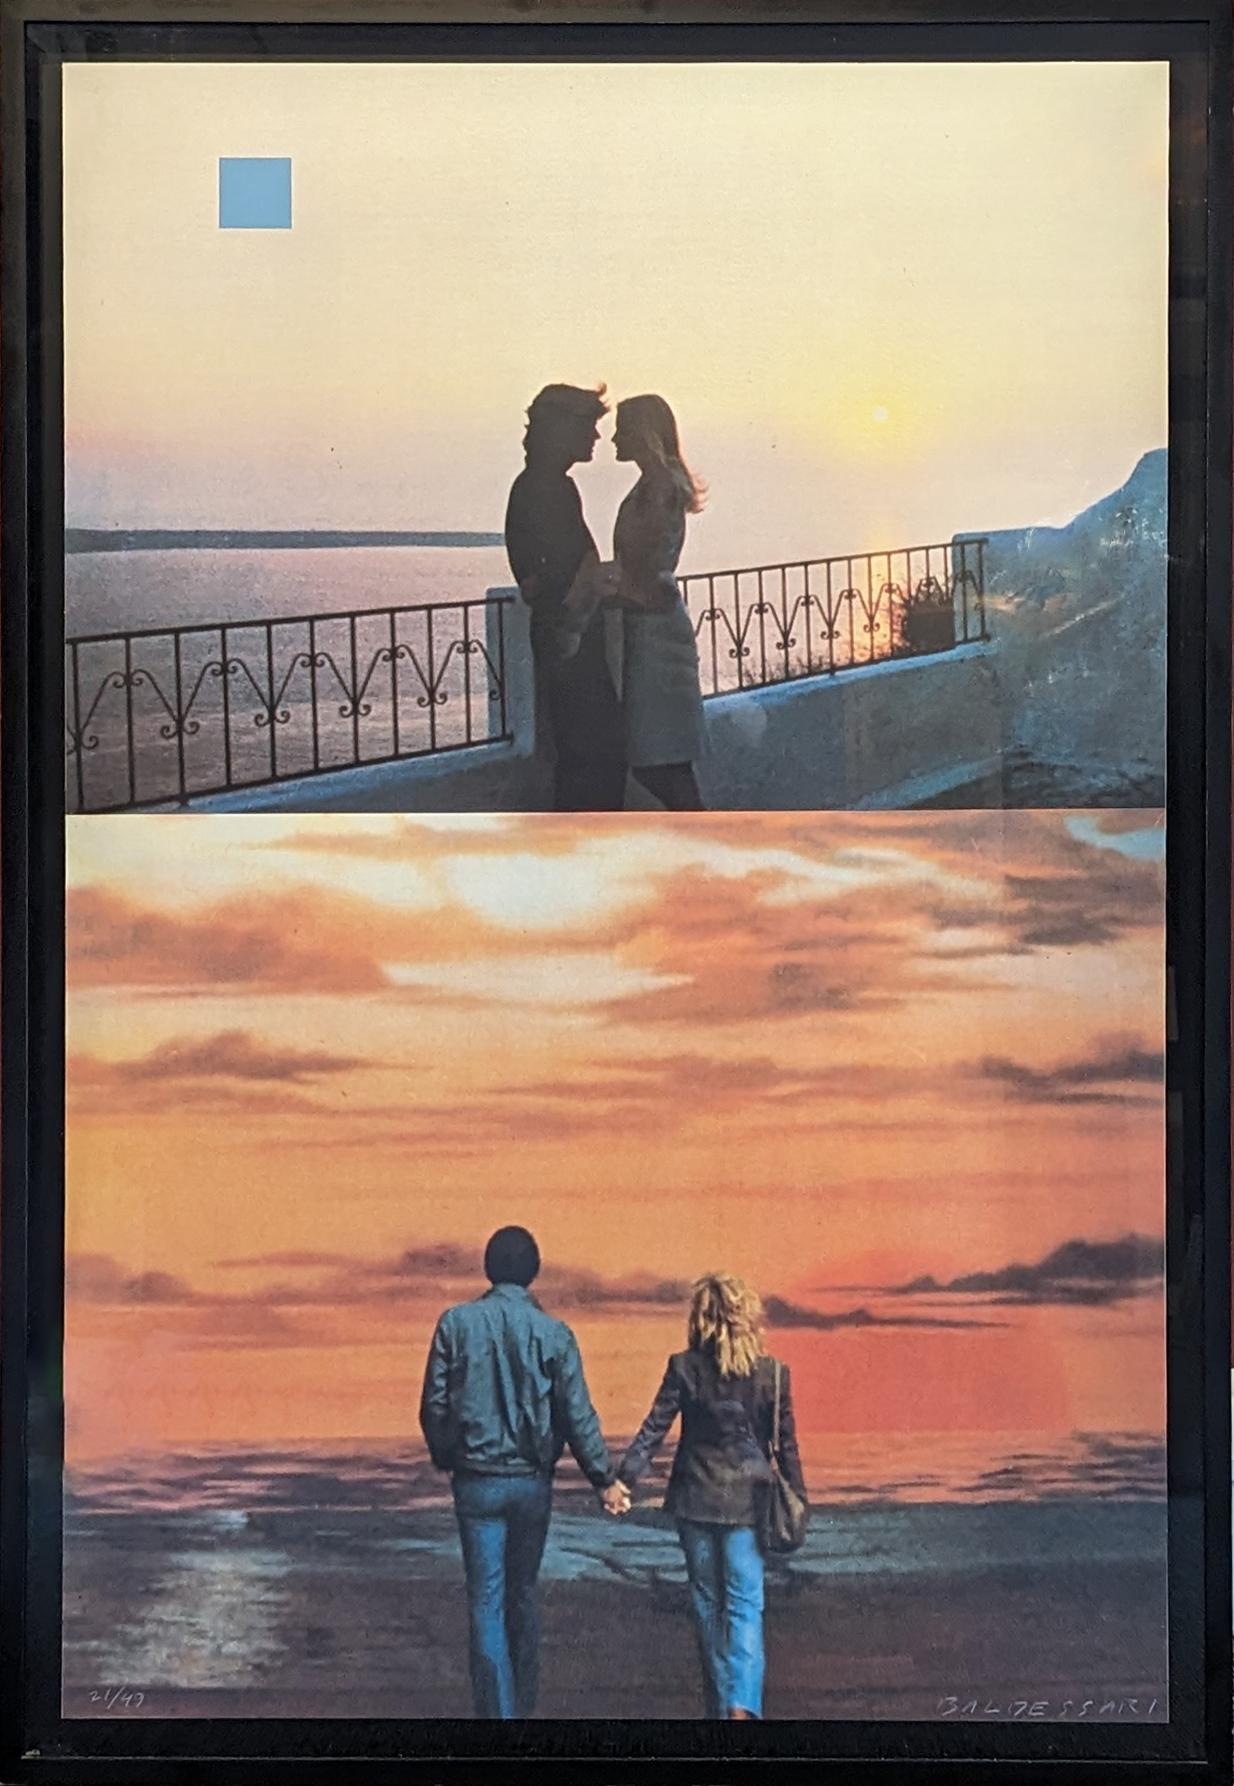 Two Sunsets (One with Square Blue Moon), 1994
Screenprint
48 x 32 inches
Edition of 49
